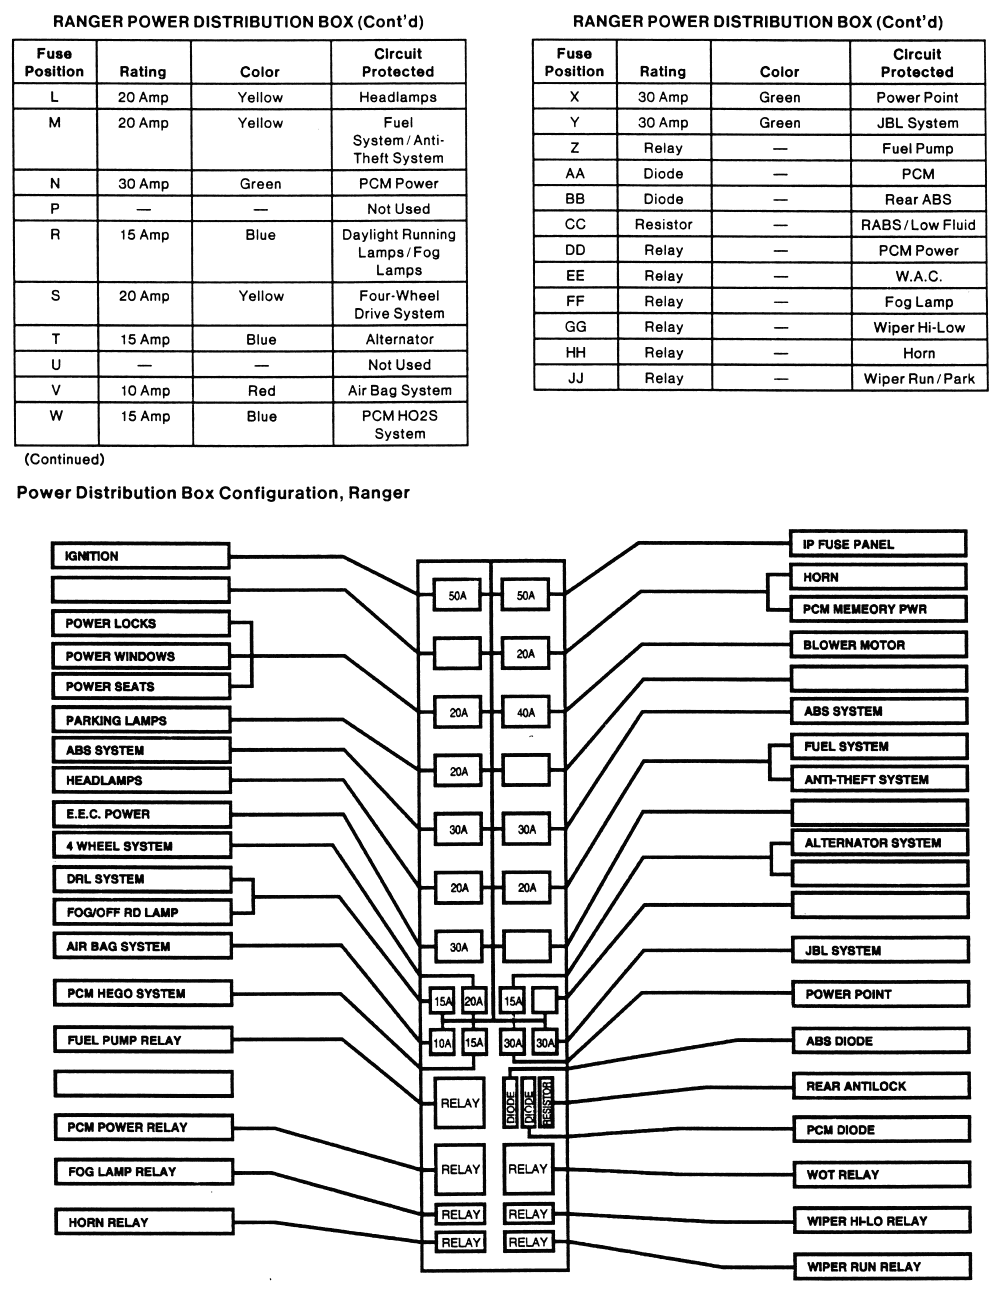 28 99 Ford Ranger Fuse Box Diagram - Wire Diagram Source Information